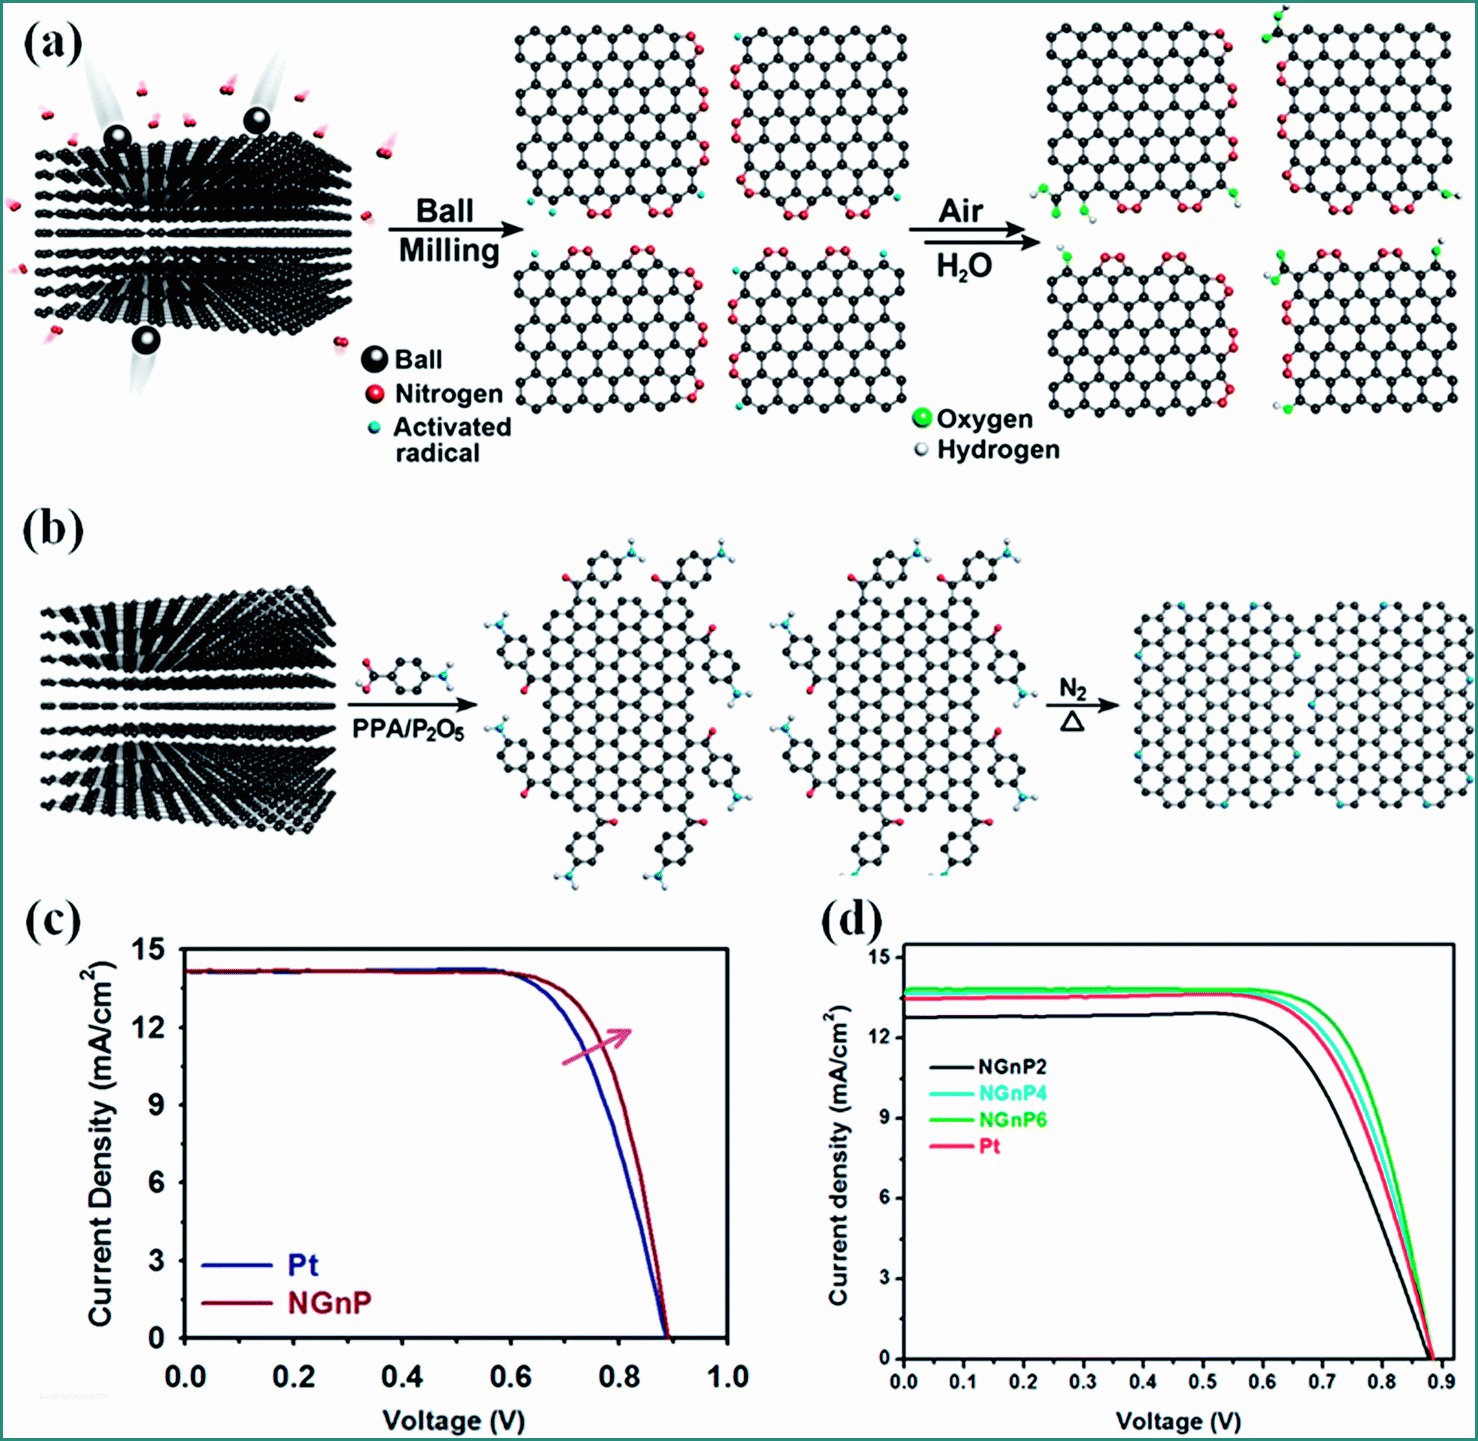 Pellet B Green E Graphene In Photovoltaic Applications organic Photovoltaic Cells